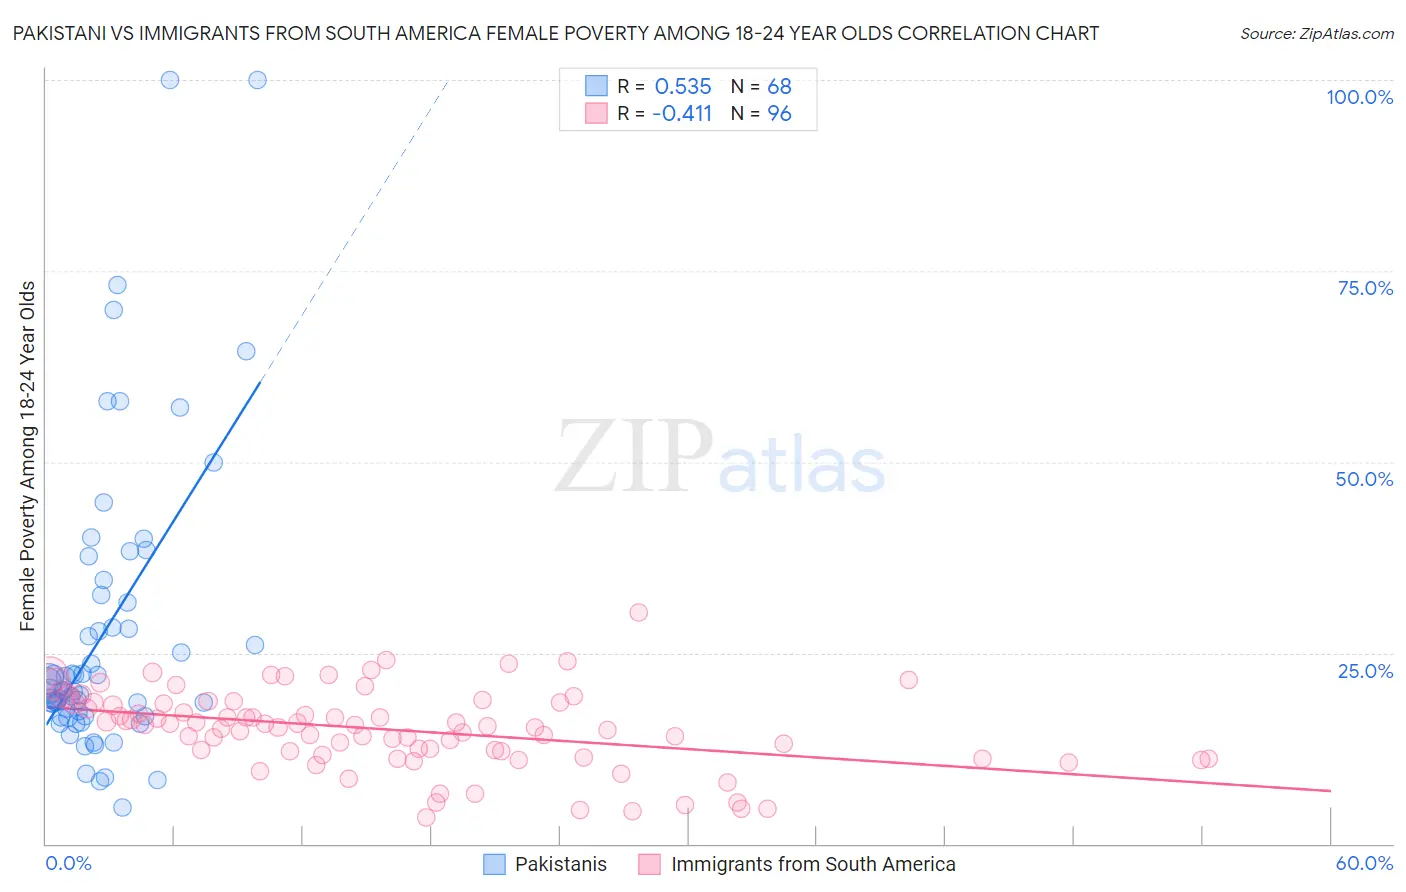 Pakistani vs Immigrants from South America Female Poverty Among 18-24 Year Olds